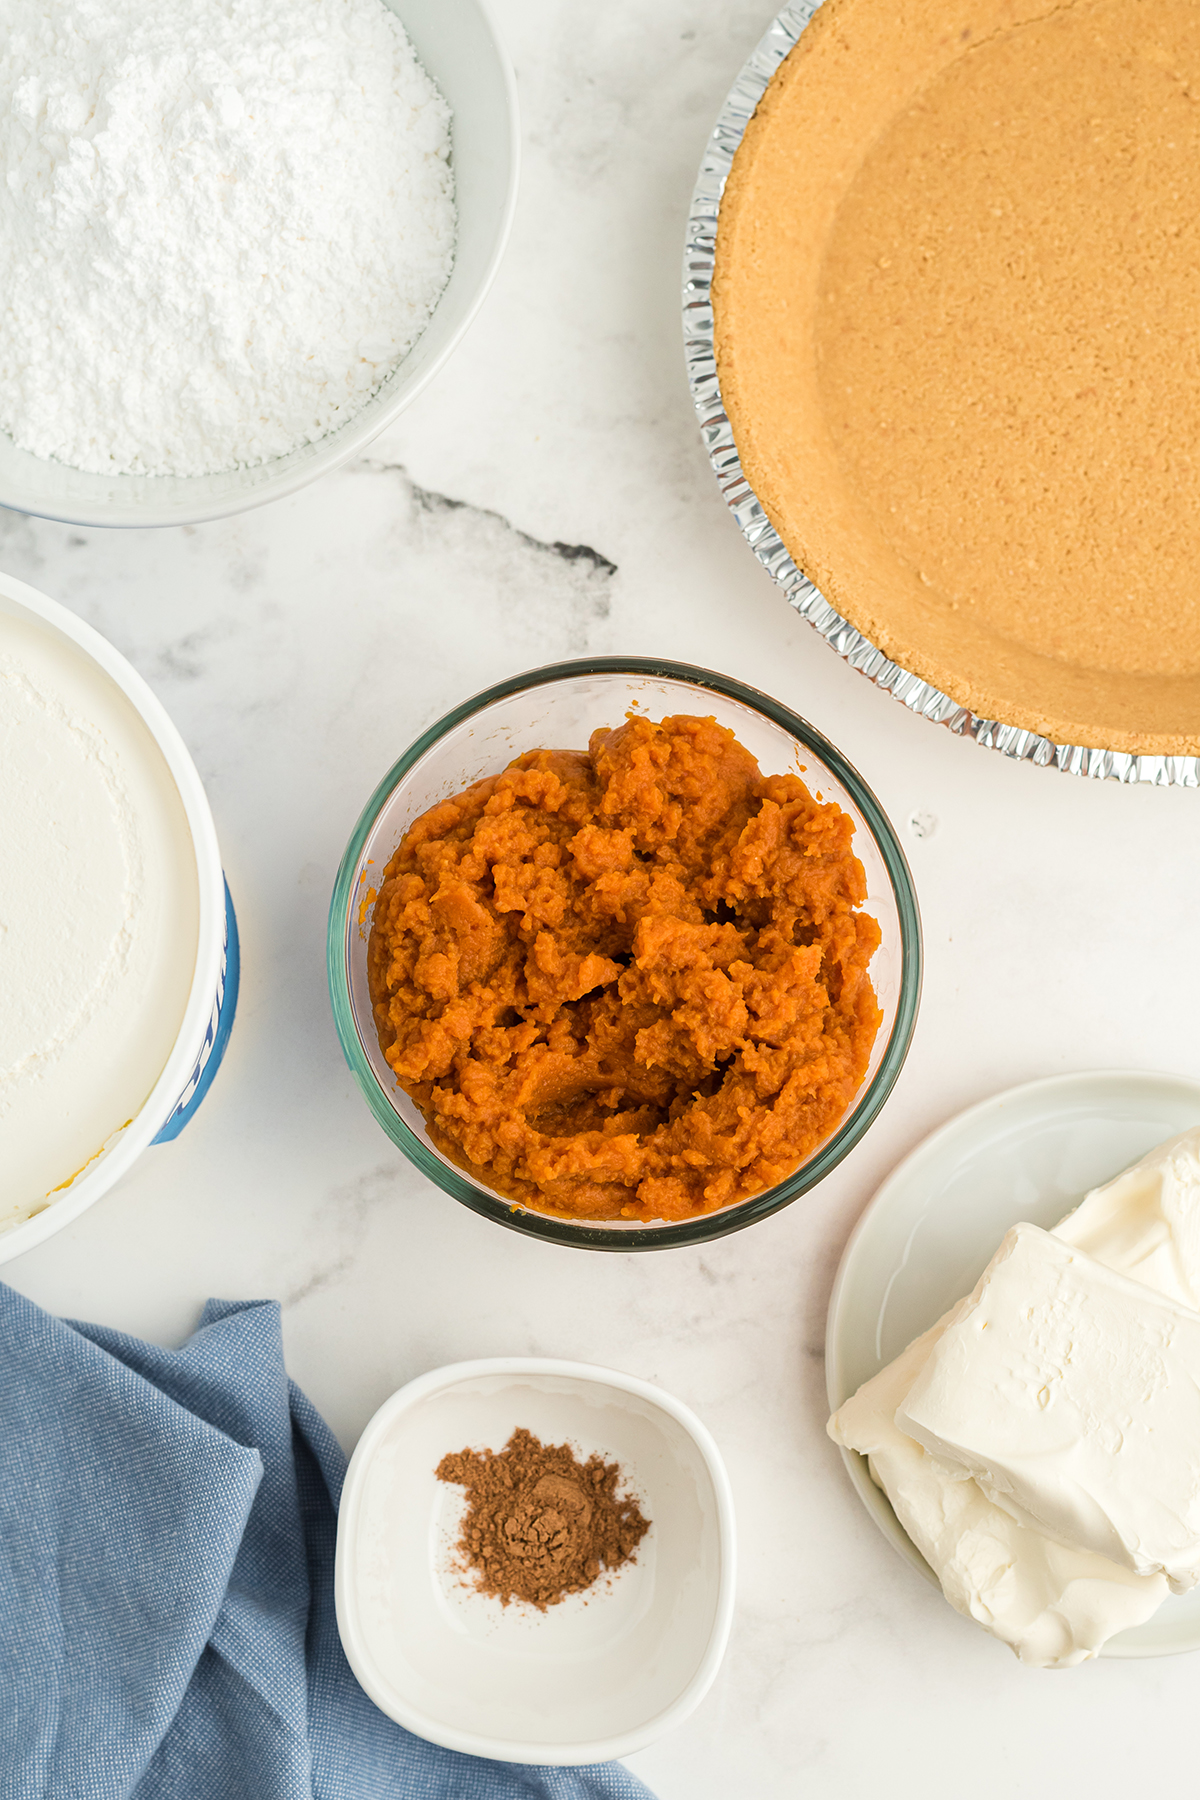 Cool Whip Pumpkin Pie ingredients on a white counter with a blue linen. The ingredients are pumpkin puree, milk, graham cracker crust, whipped cream, and vanilla pudding.